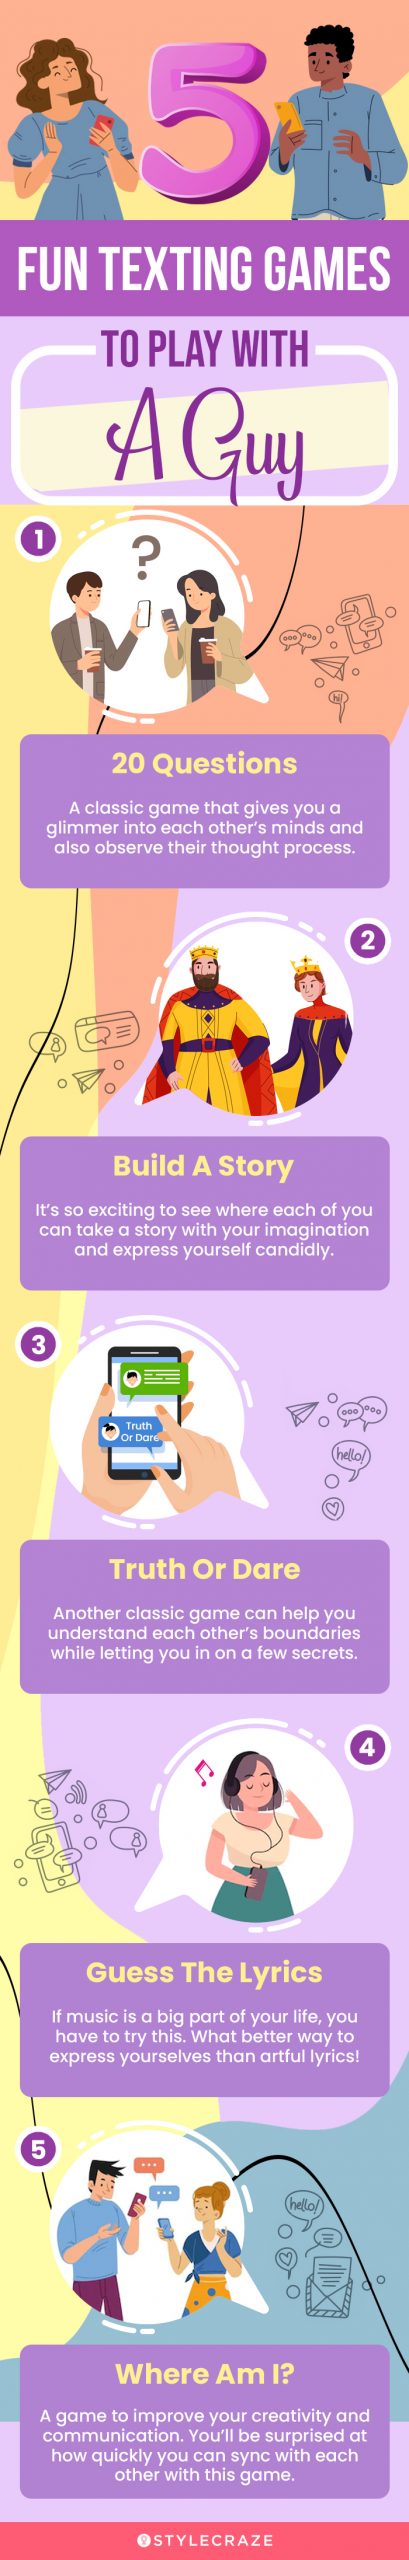 5 fun texting games to play with a guy (infographic)